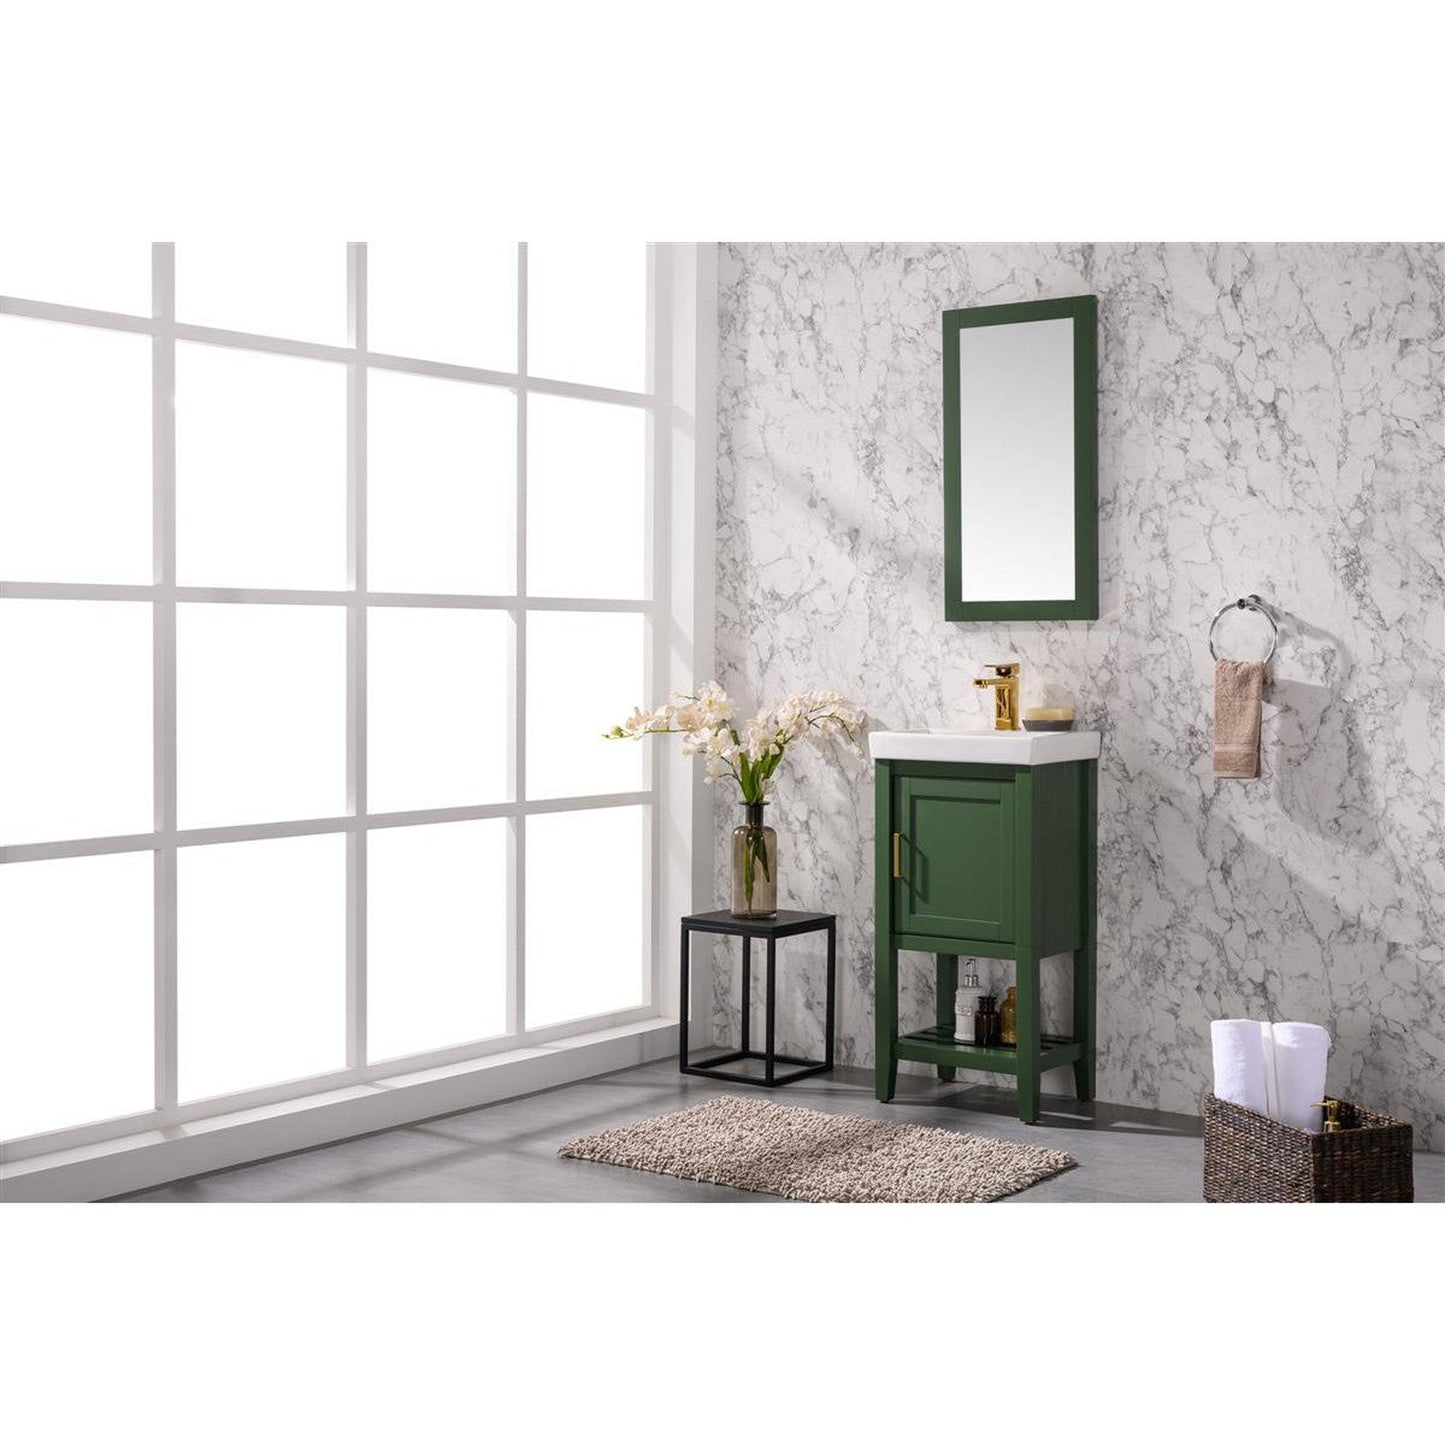 Legion Furniture WLF9018 18" Vogue Green Freestanding Vanity Cabinet With White Ceramic Top and Sink